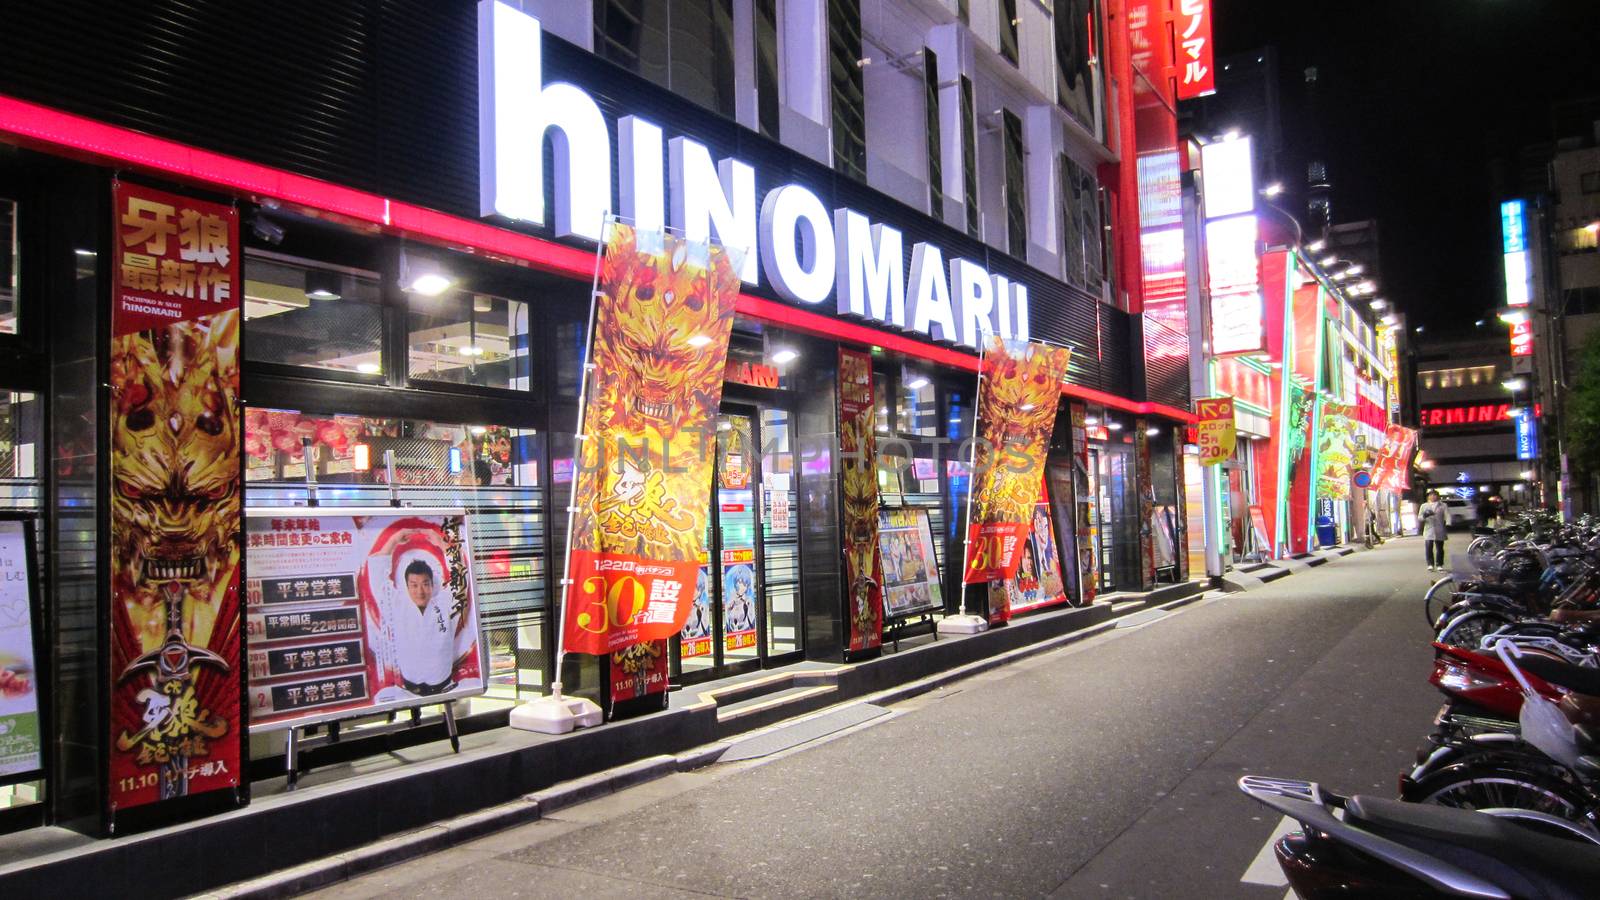 TOKYO, JAPAN - JANUARY 2, 2015: Japanese bright lighted establishment on a street in Tokyo at night with lots of advertisement and some scooters parked in front on January 2, 2015 in Tokyo, Japan.